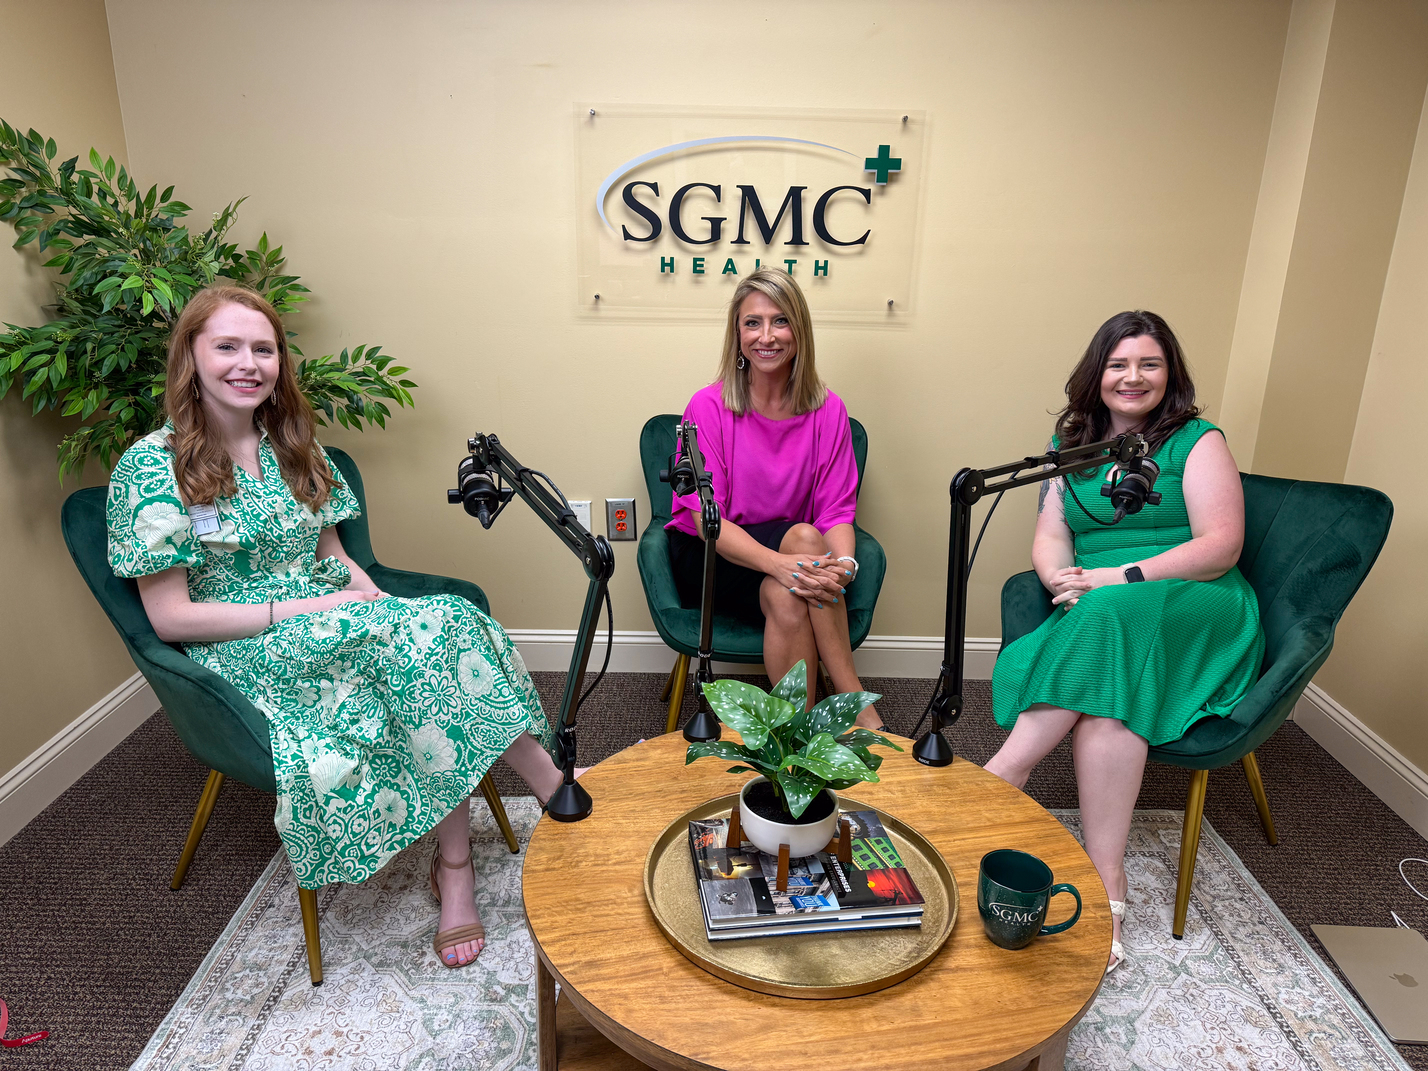 SGMC Health’s Podcast Team Earns Gold Award for Excellence in Healthcare Communication